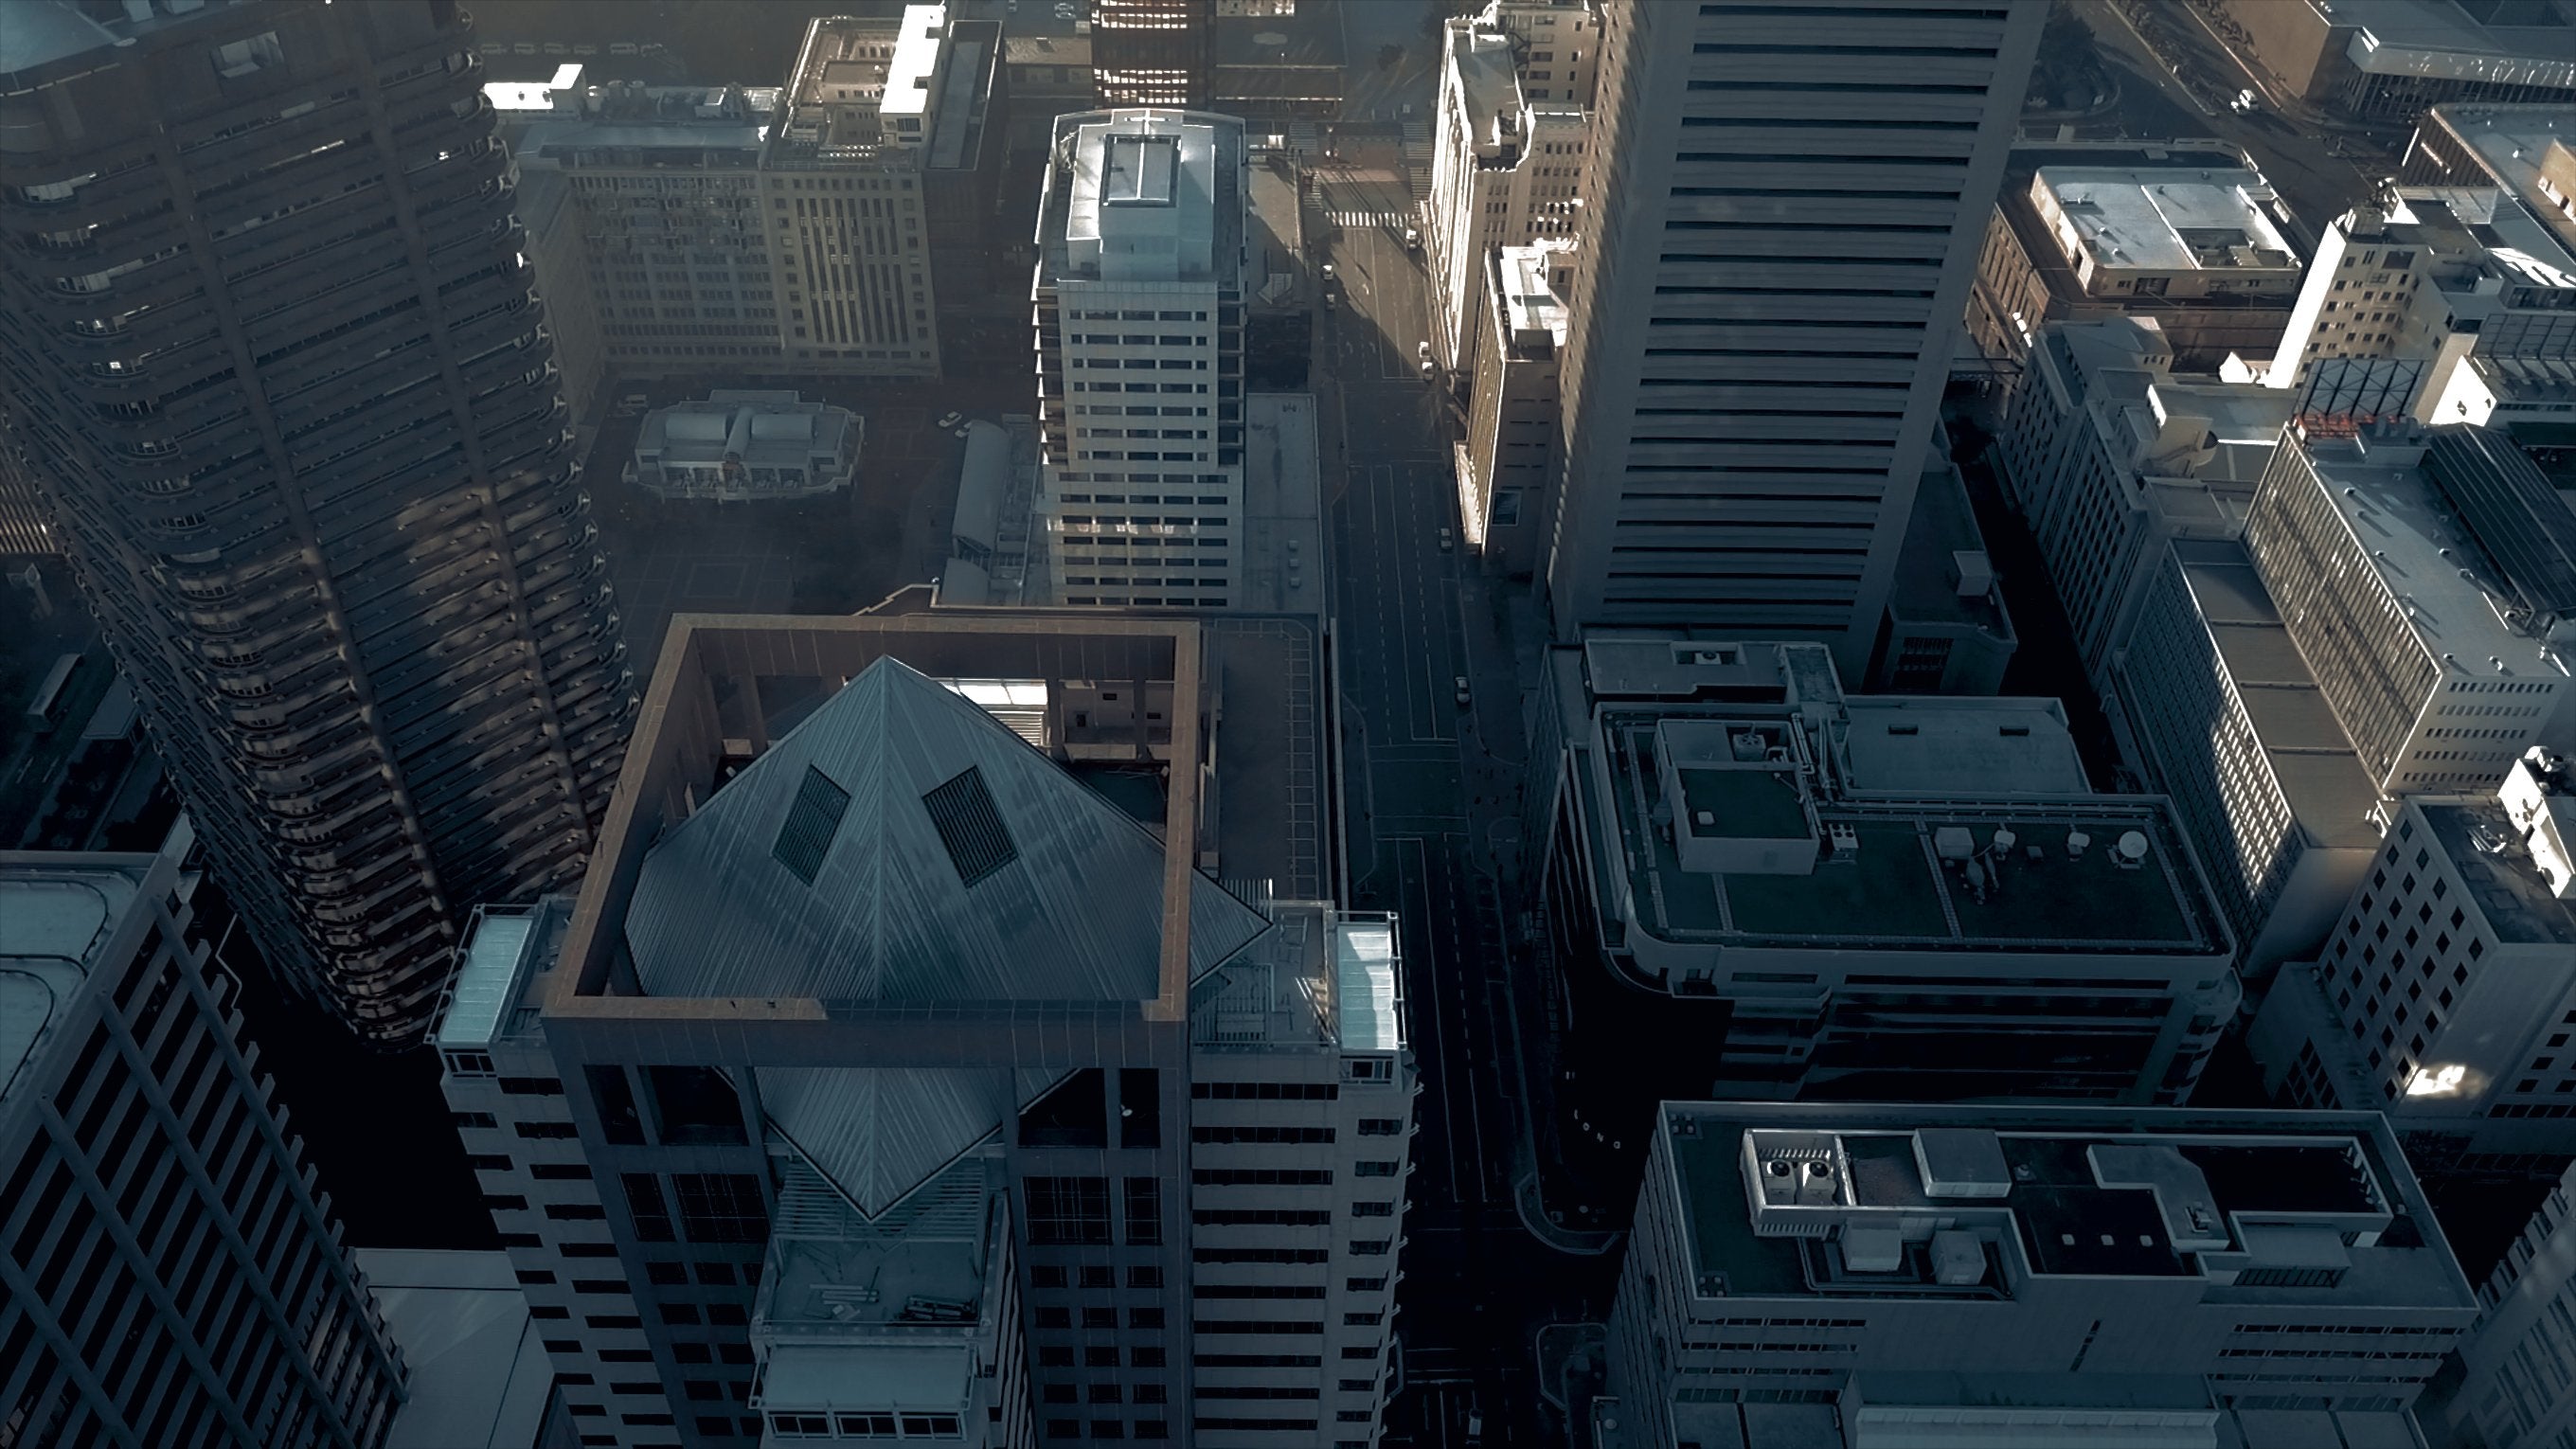 Match Both Camera & Drone Footage With Our Premium Grade Cinematic Color Preset LUTs